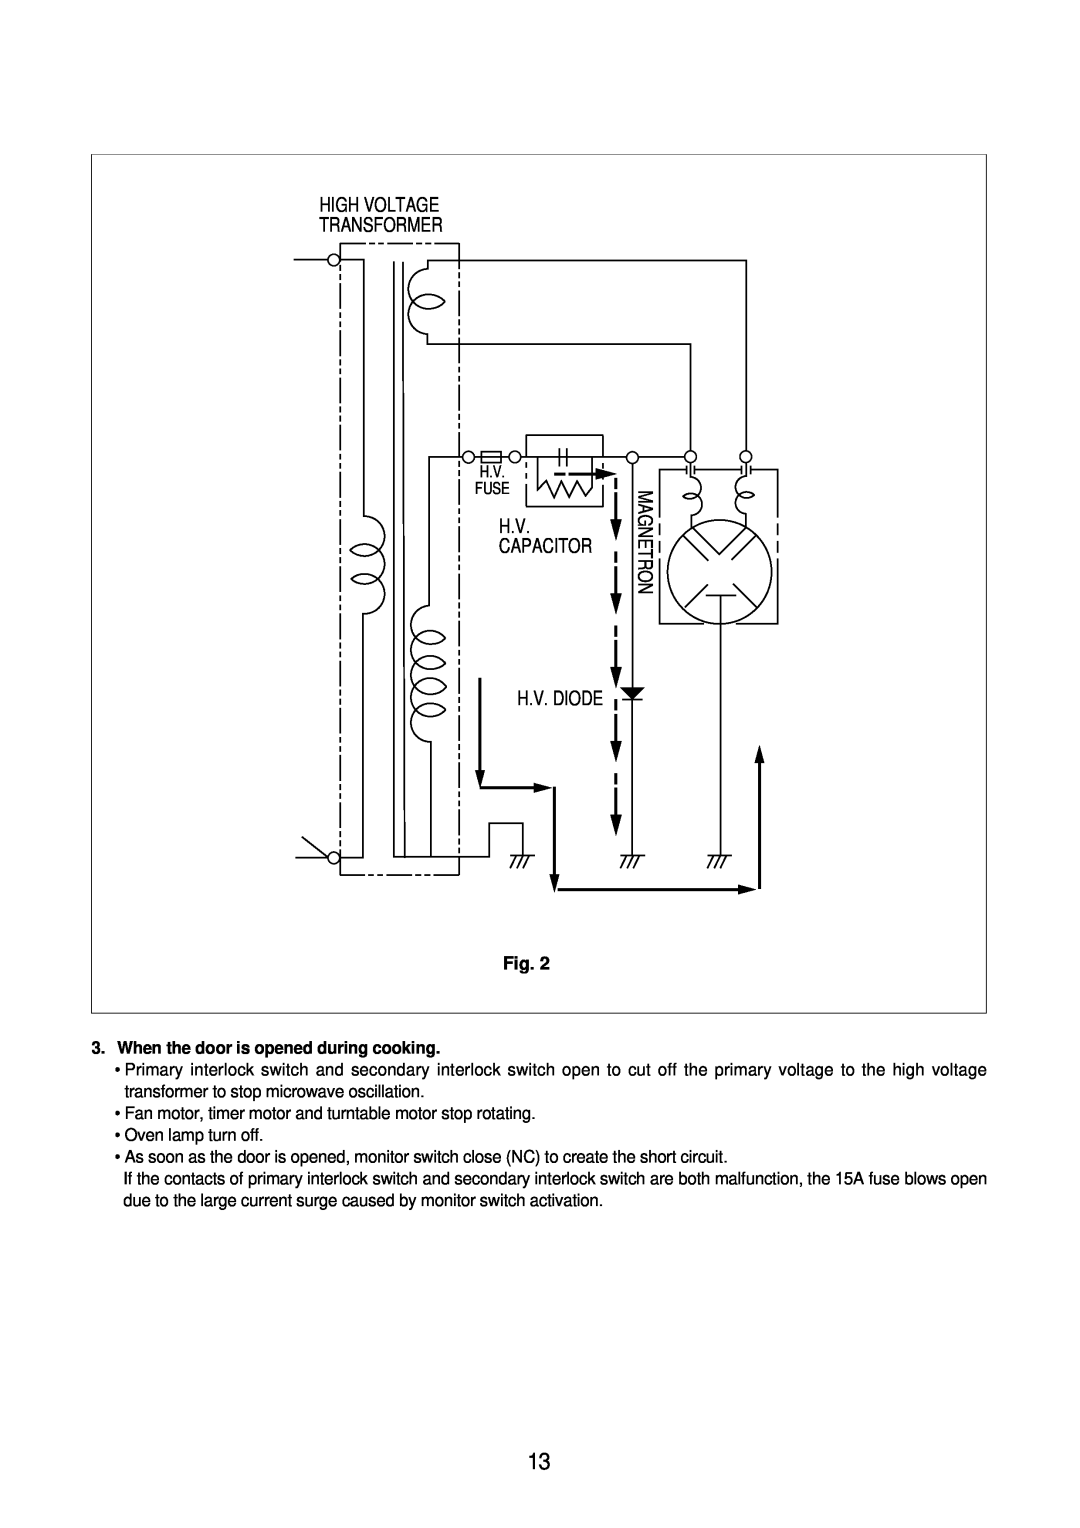 Daewoo KOR-61155, KOR-61151 service manual H.V Capacitor H.V. Diode, When the door is opened during cooking 